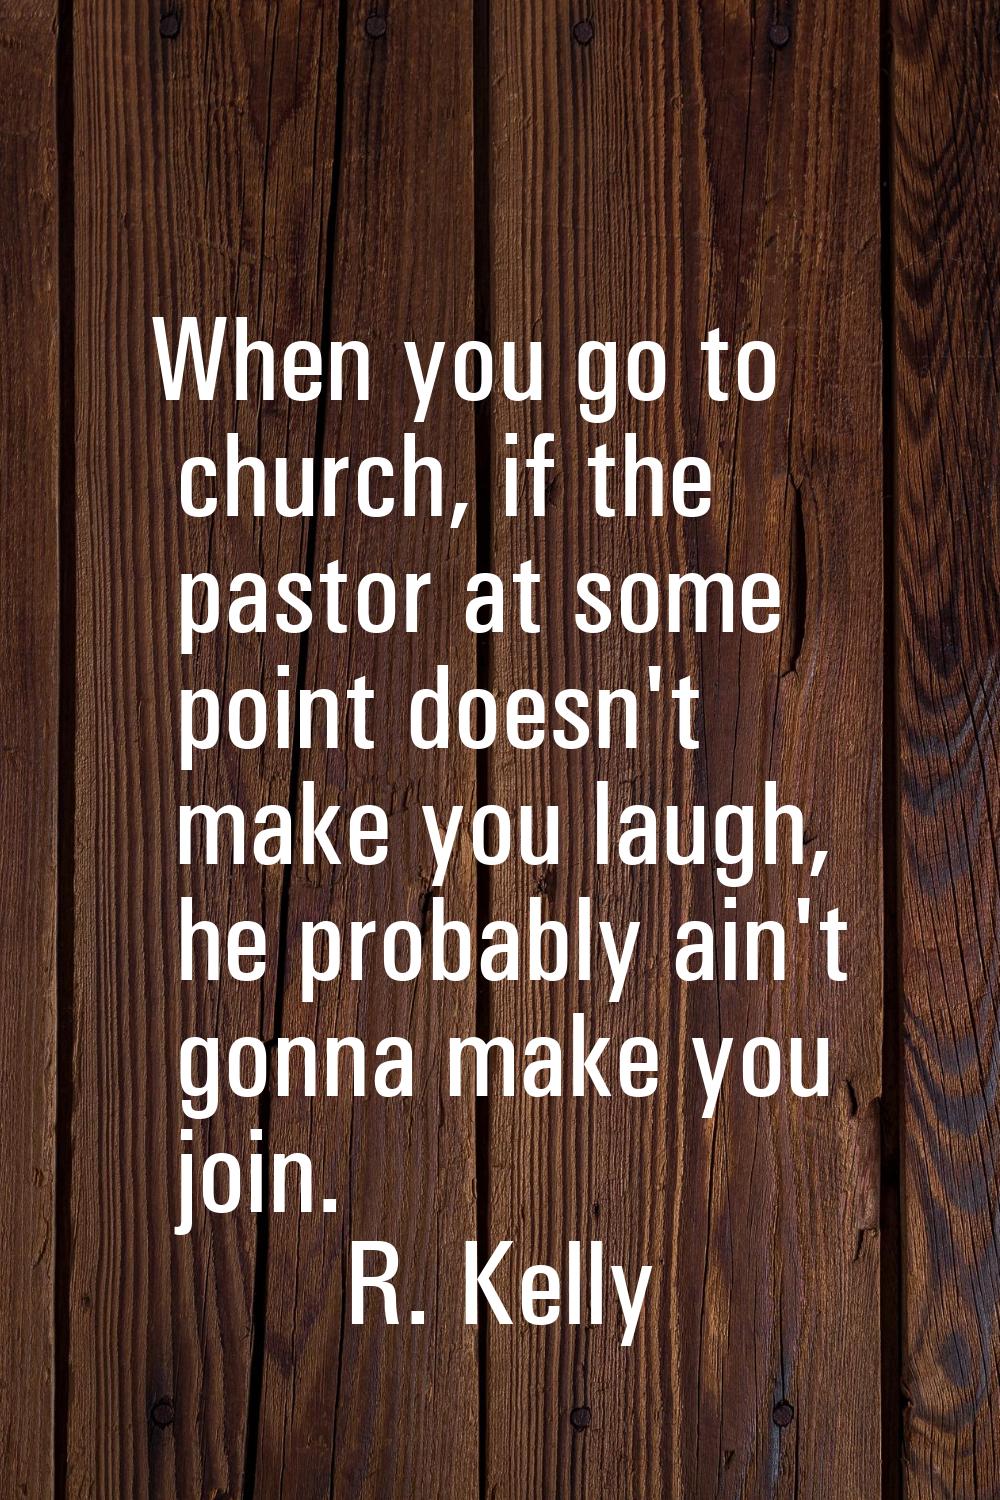 When you go to church, if the pastor at some point doesn't make you laugh, he probably ain't gonna 